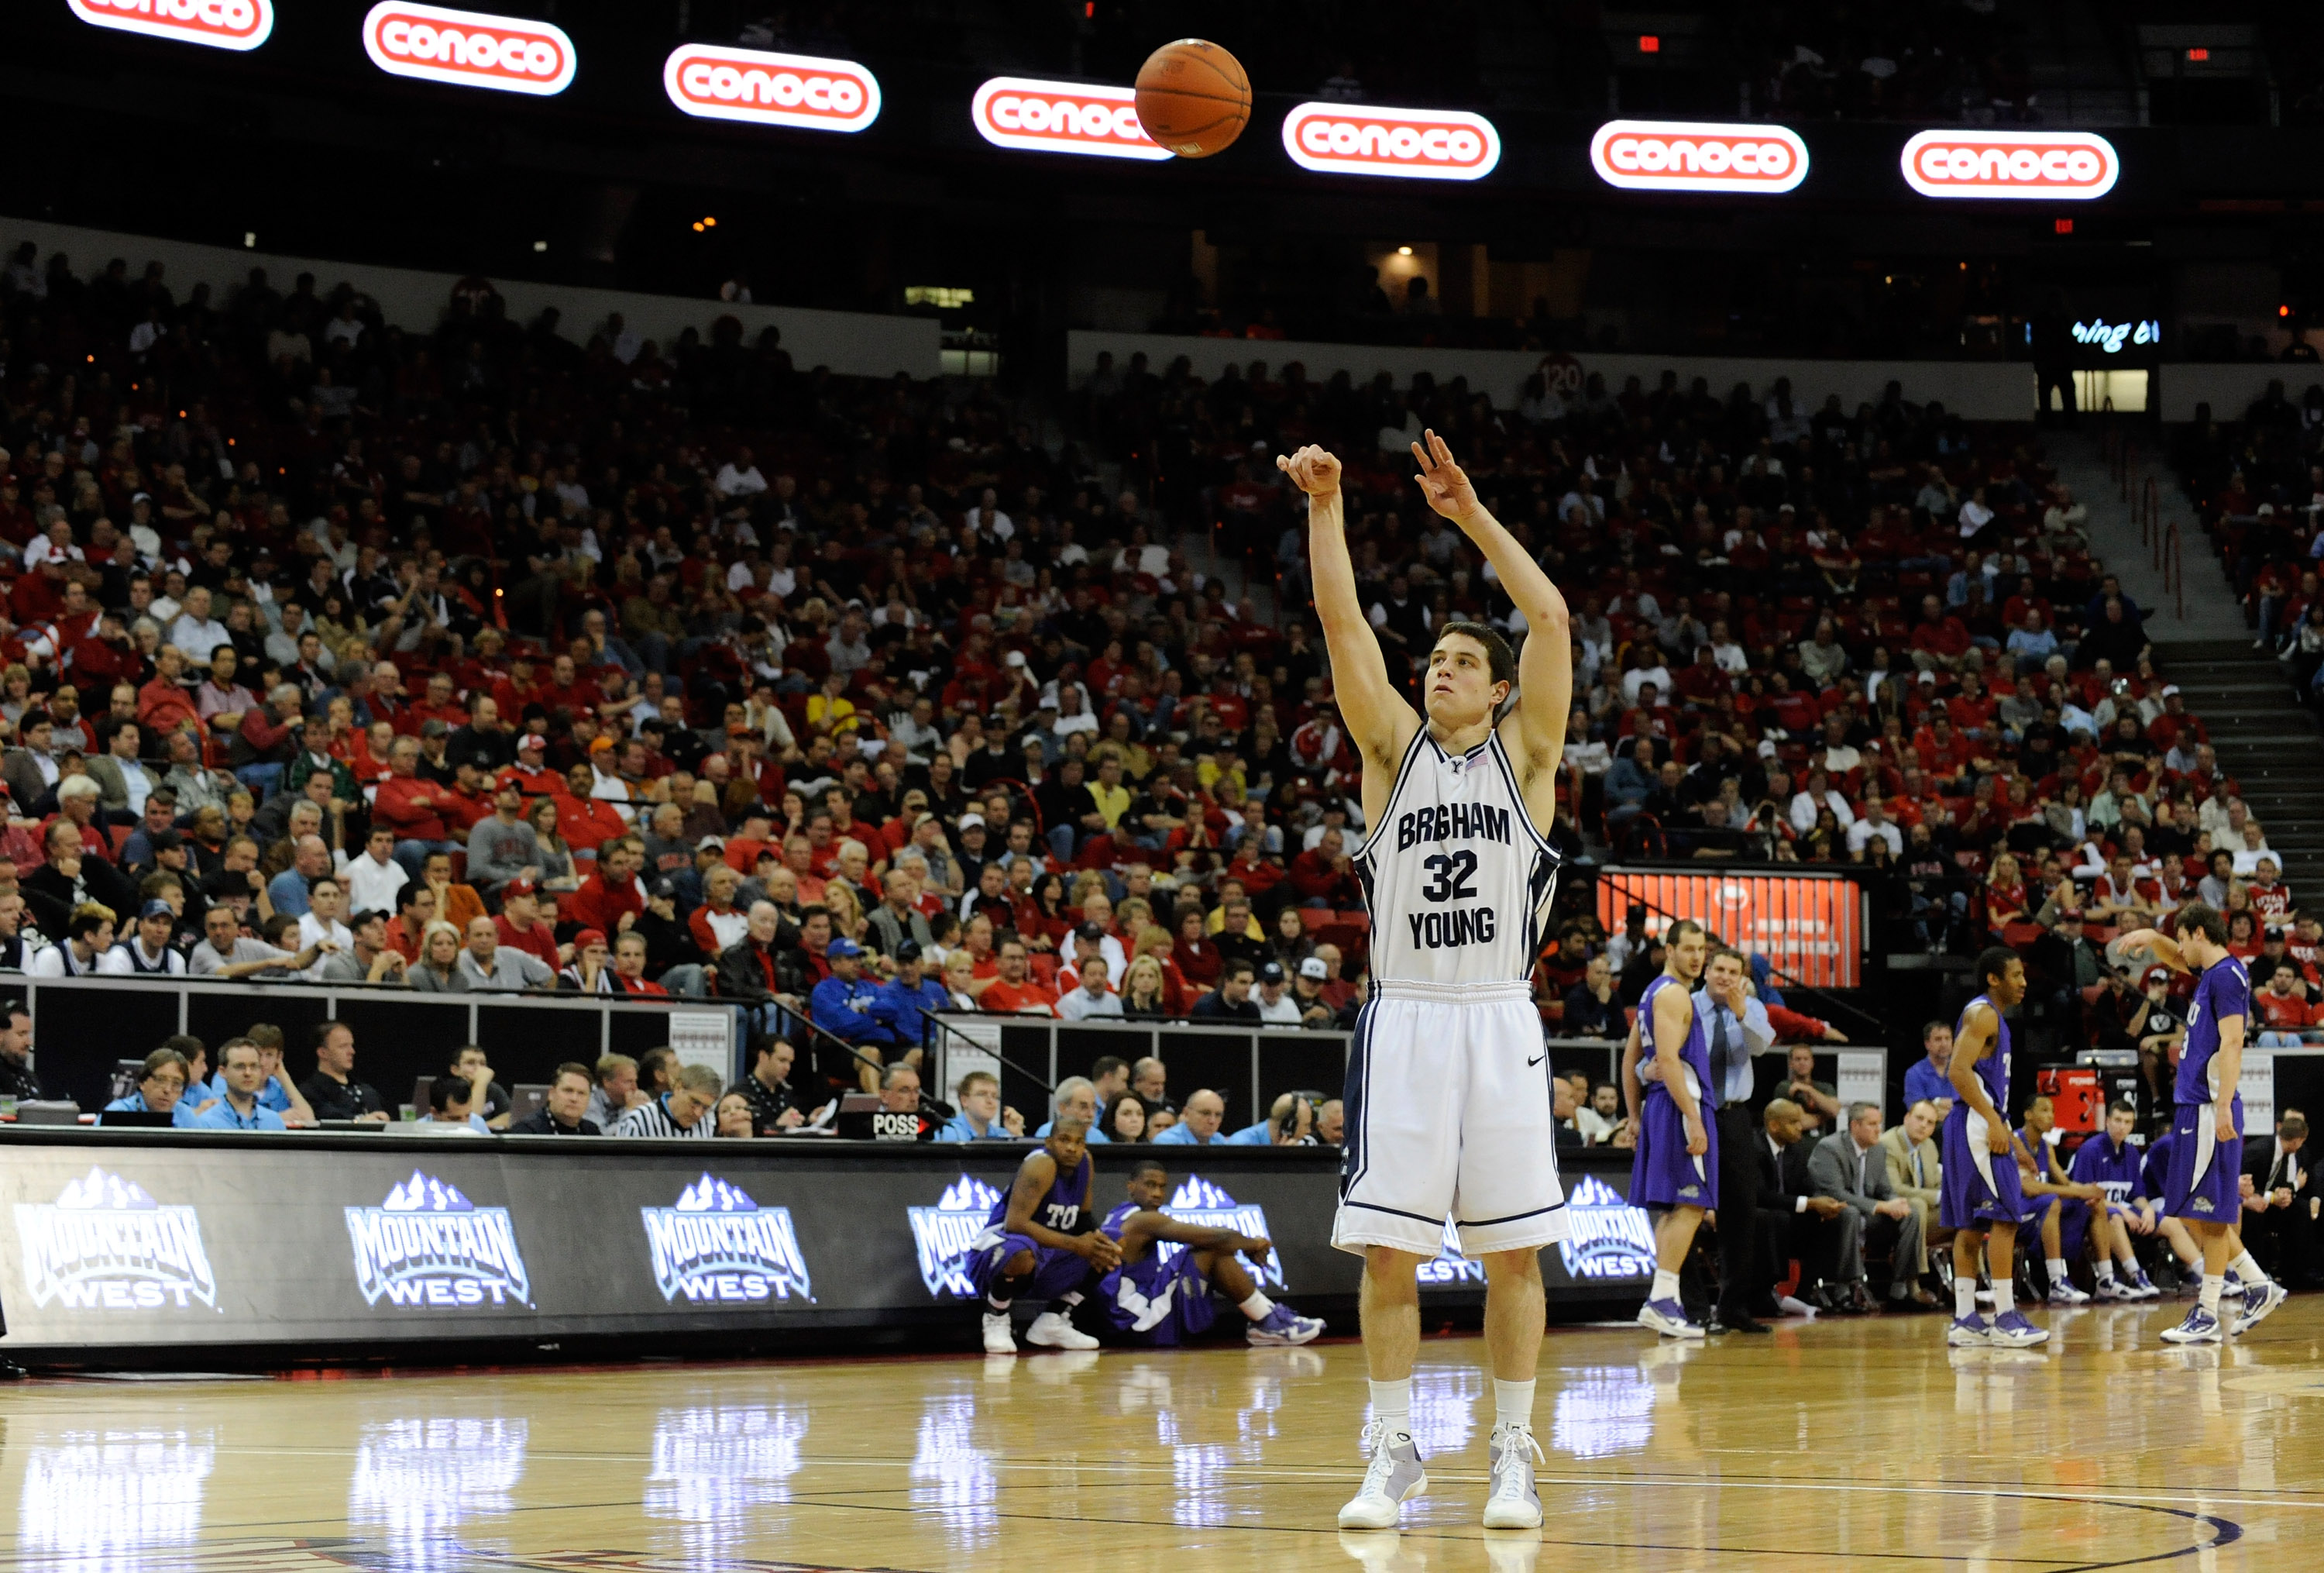 Former BYU Star Jimmer Fredette Expected To Meet With Phoenix Suns